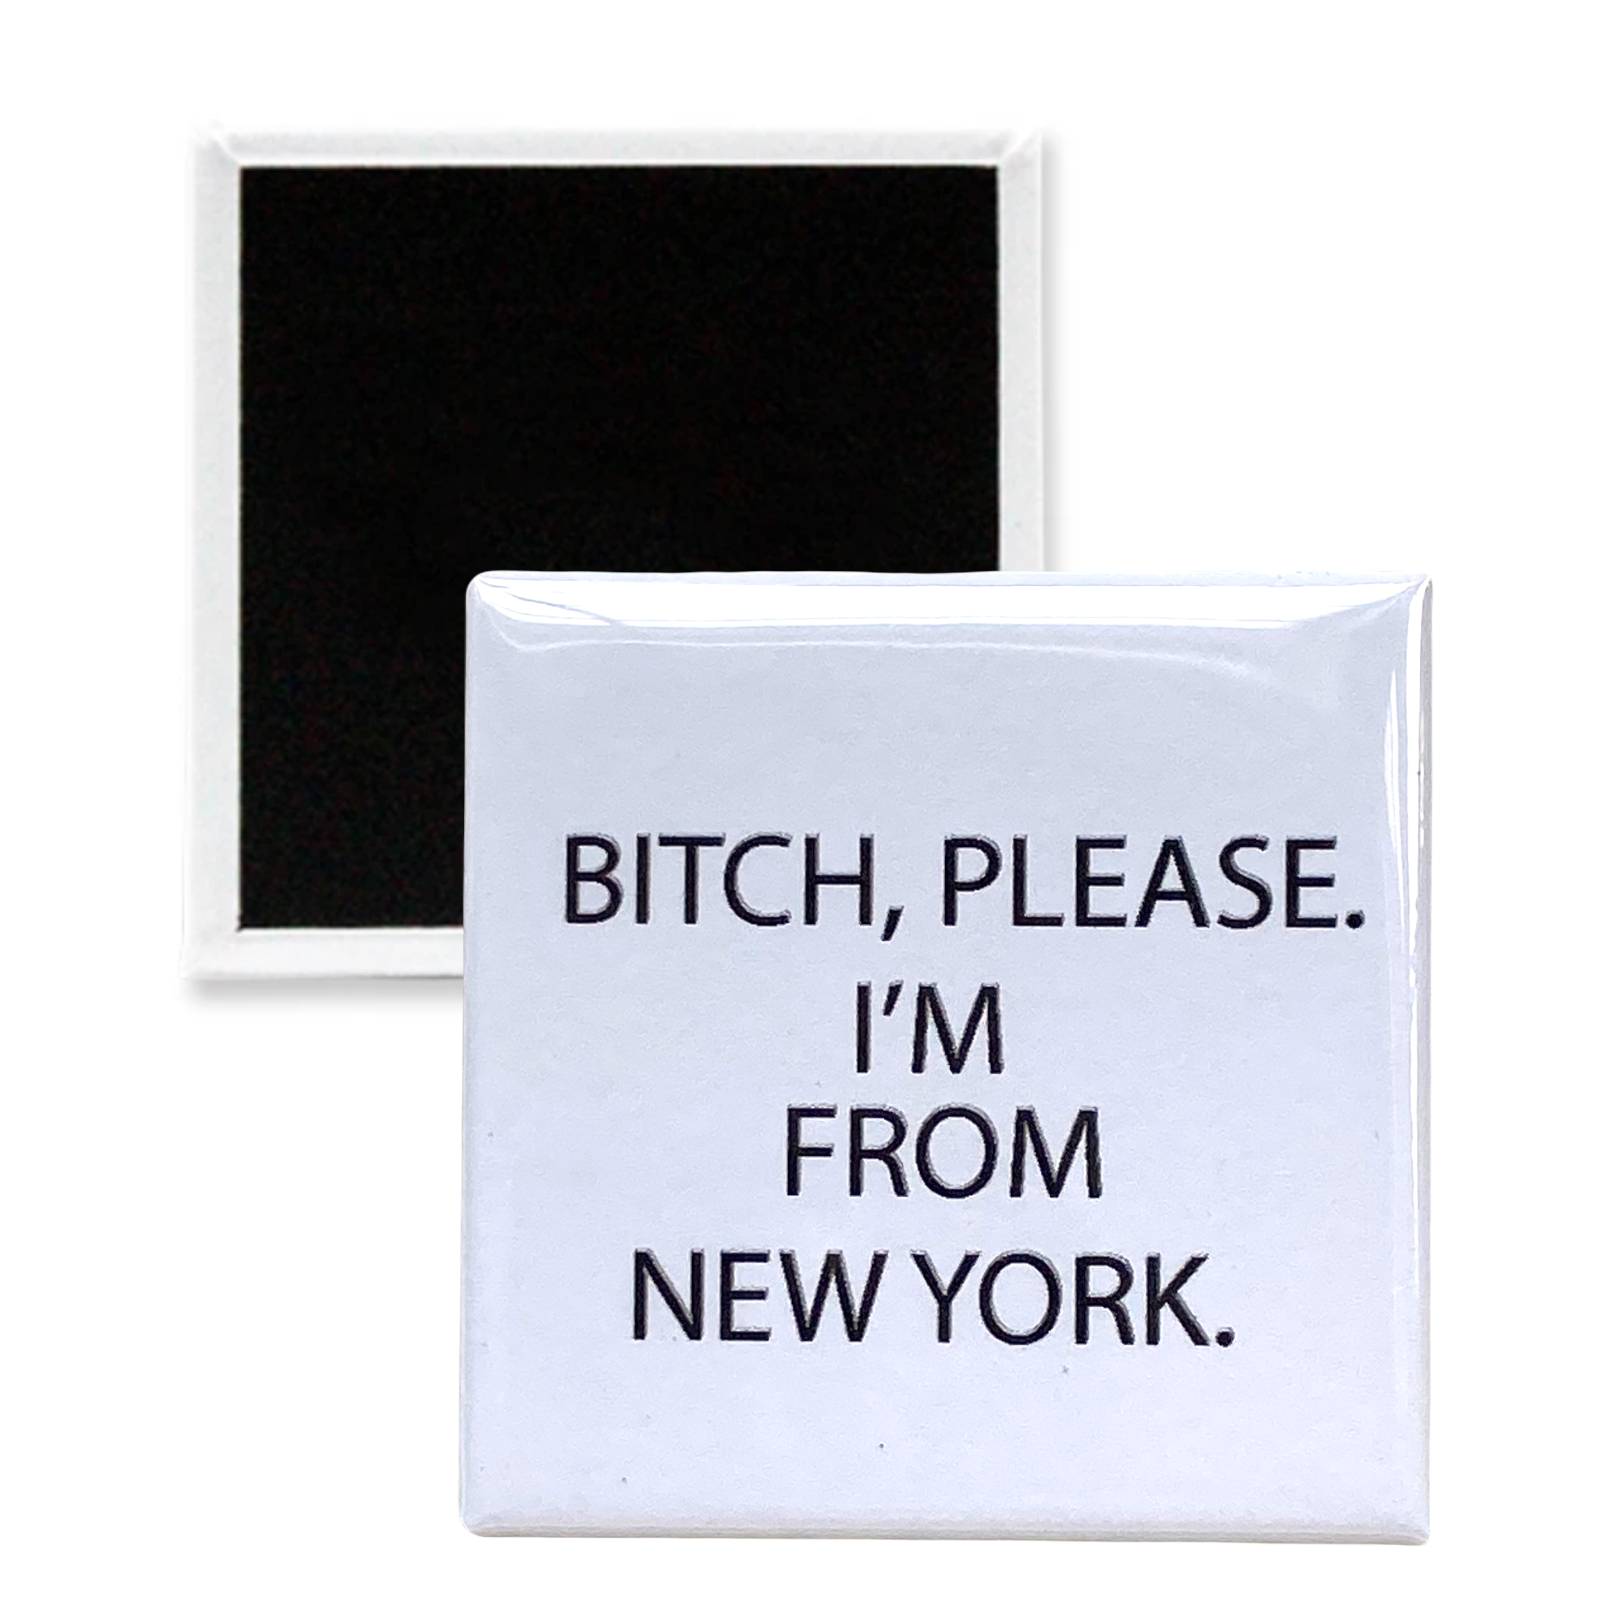 Bitch, Please. I'm From New York - Magnet - 2-in x 2-in - Mellow Monkey